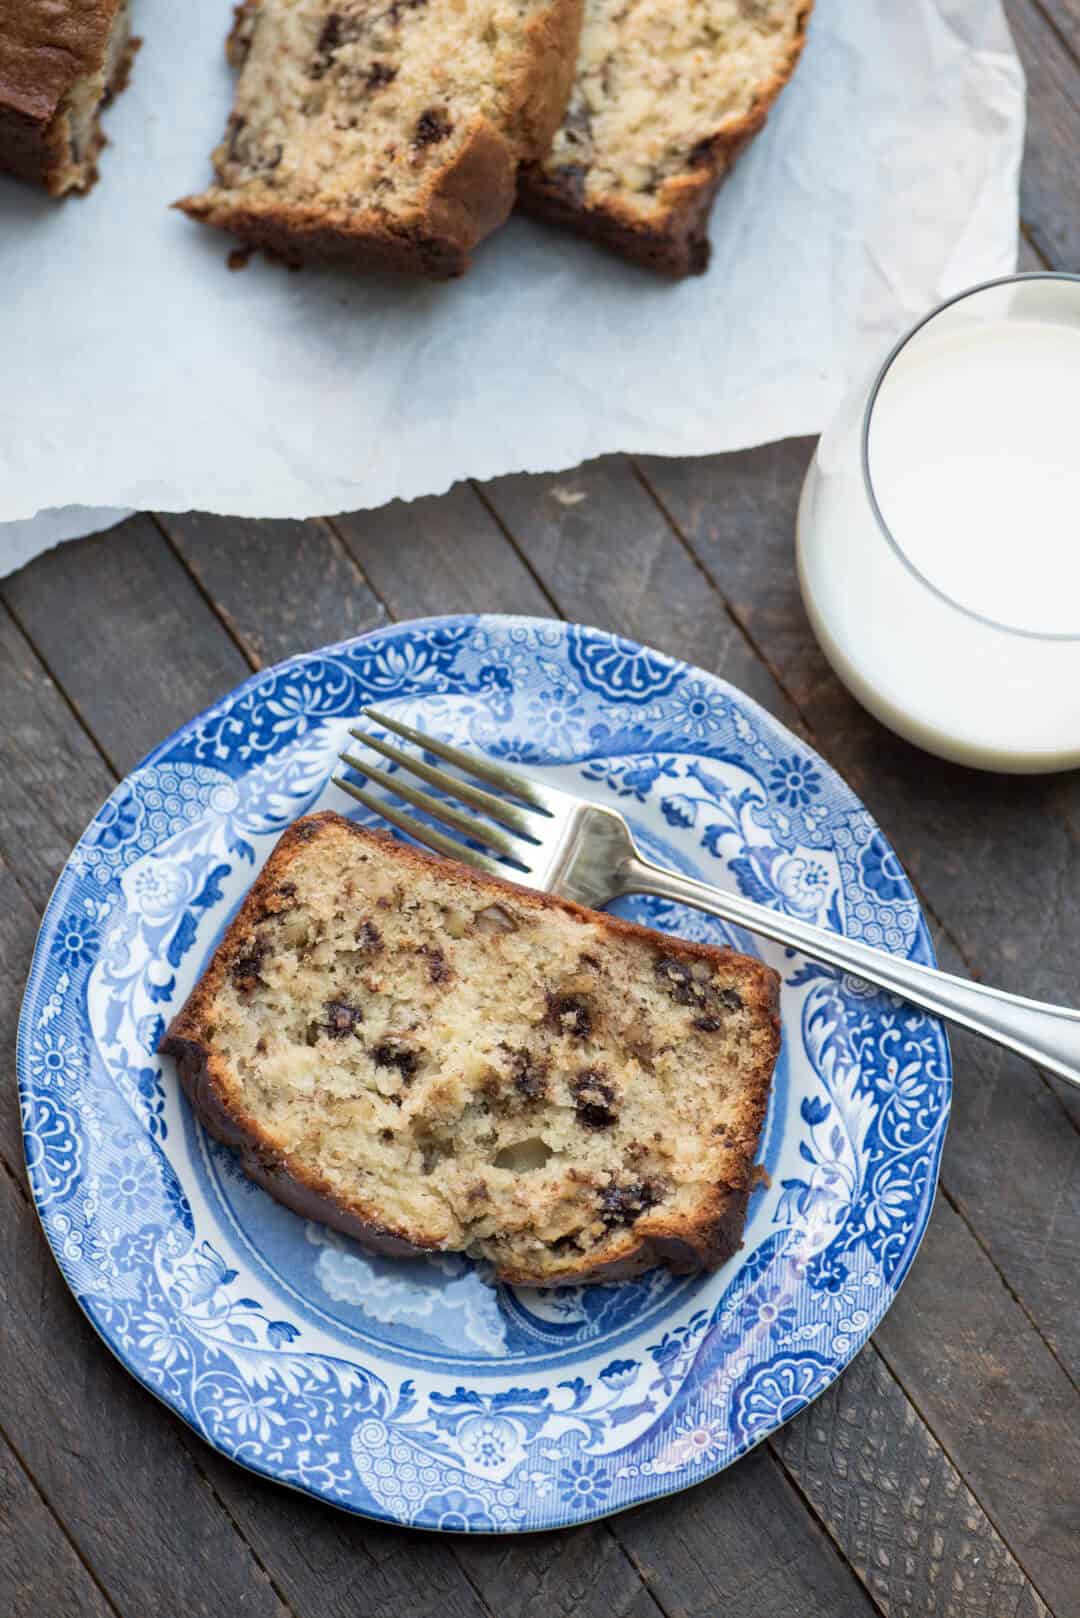 A slice of Sour Cream Chocolate Chip Banana Bread on a blue plate with a fork.